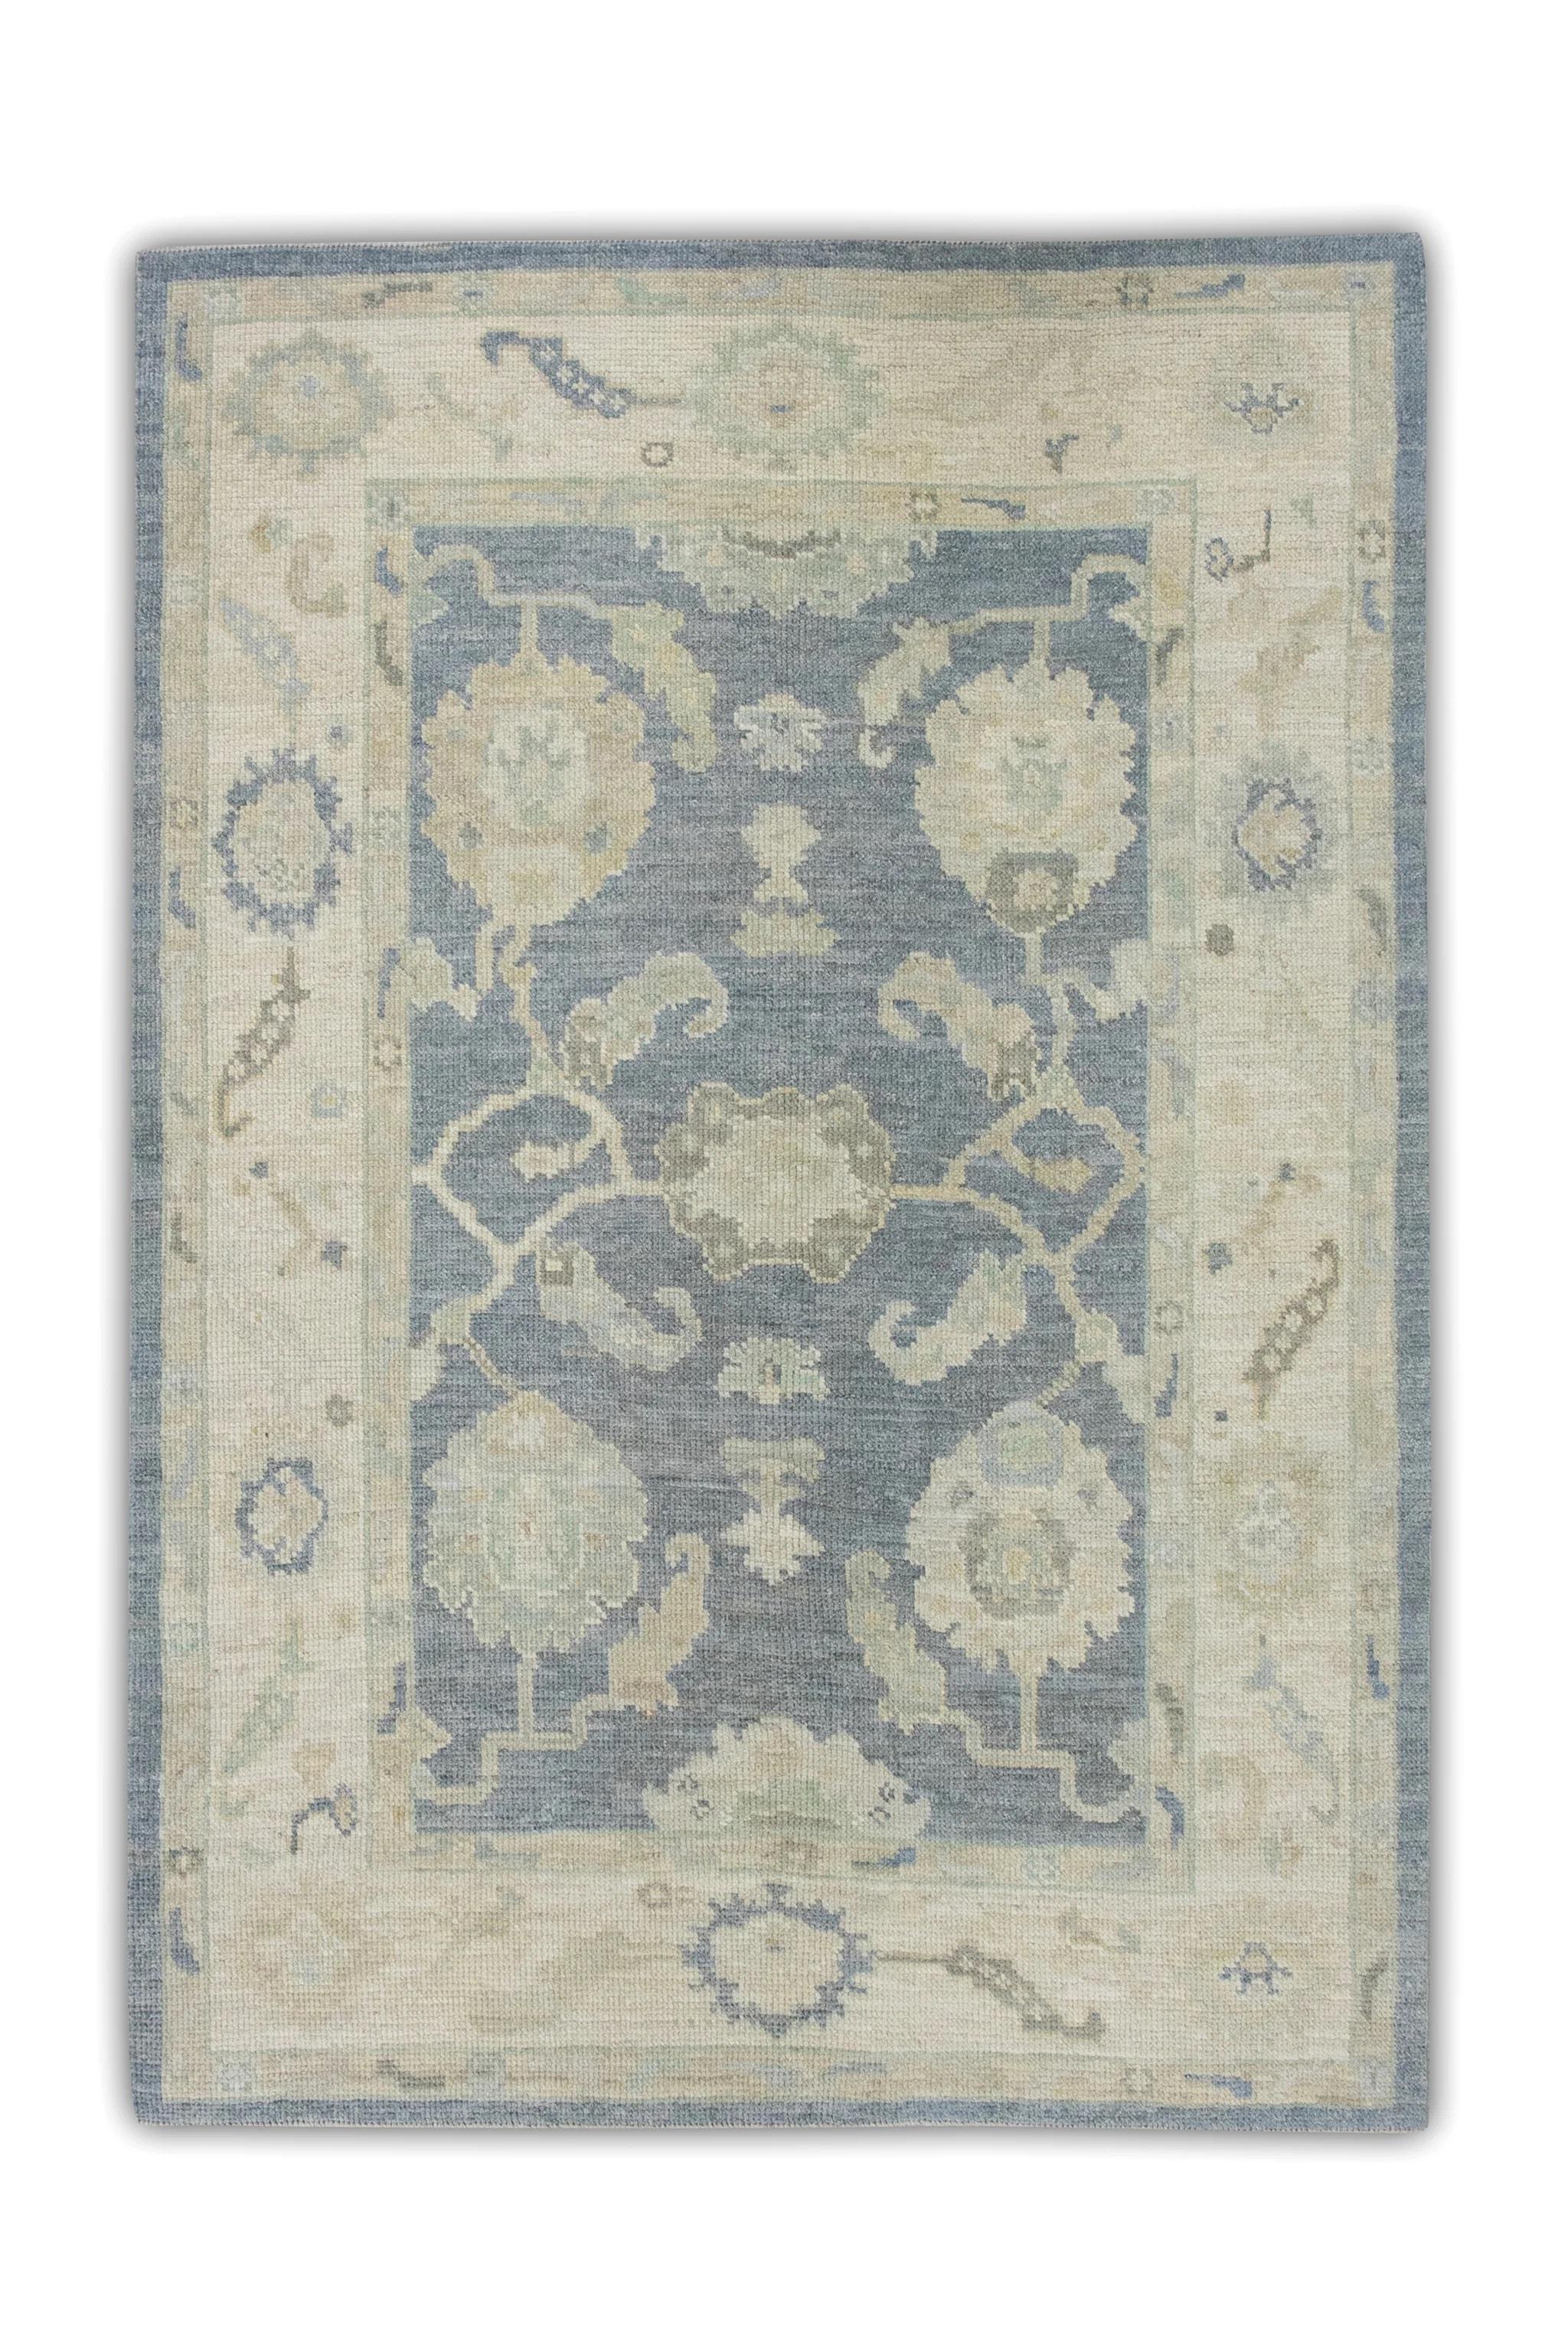 Contemporary Blue Handwoven Wool Floral Design Turkish Oushak Rug 4'2